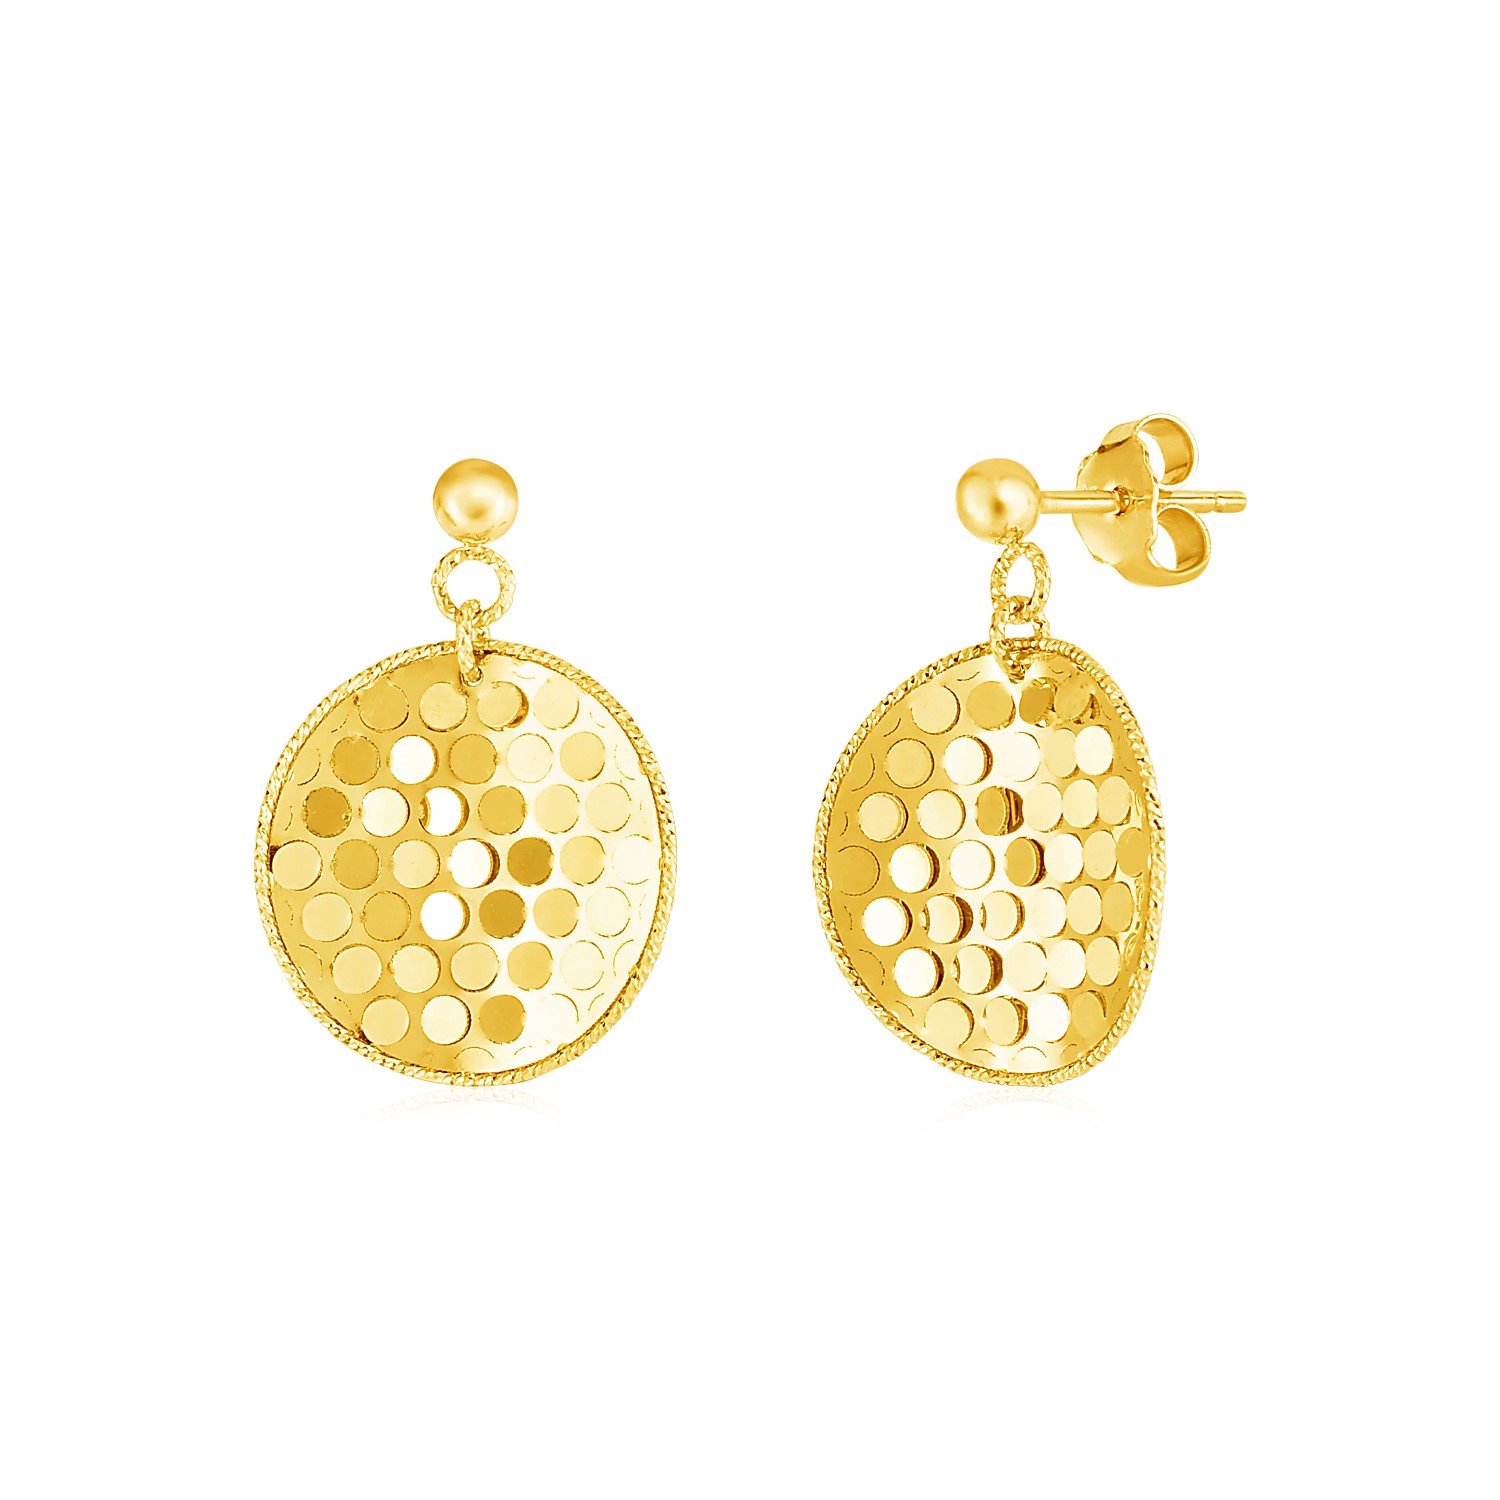 14k Yellow Gold Textured Round Drop Earrings - Richard Cannon Jewelry